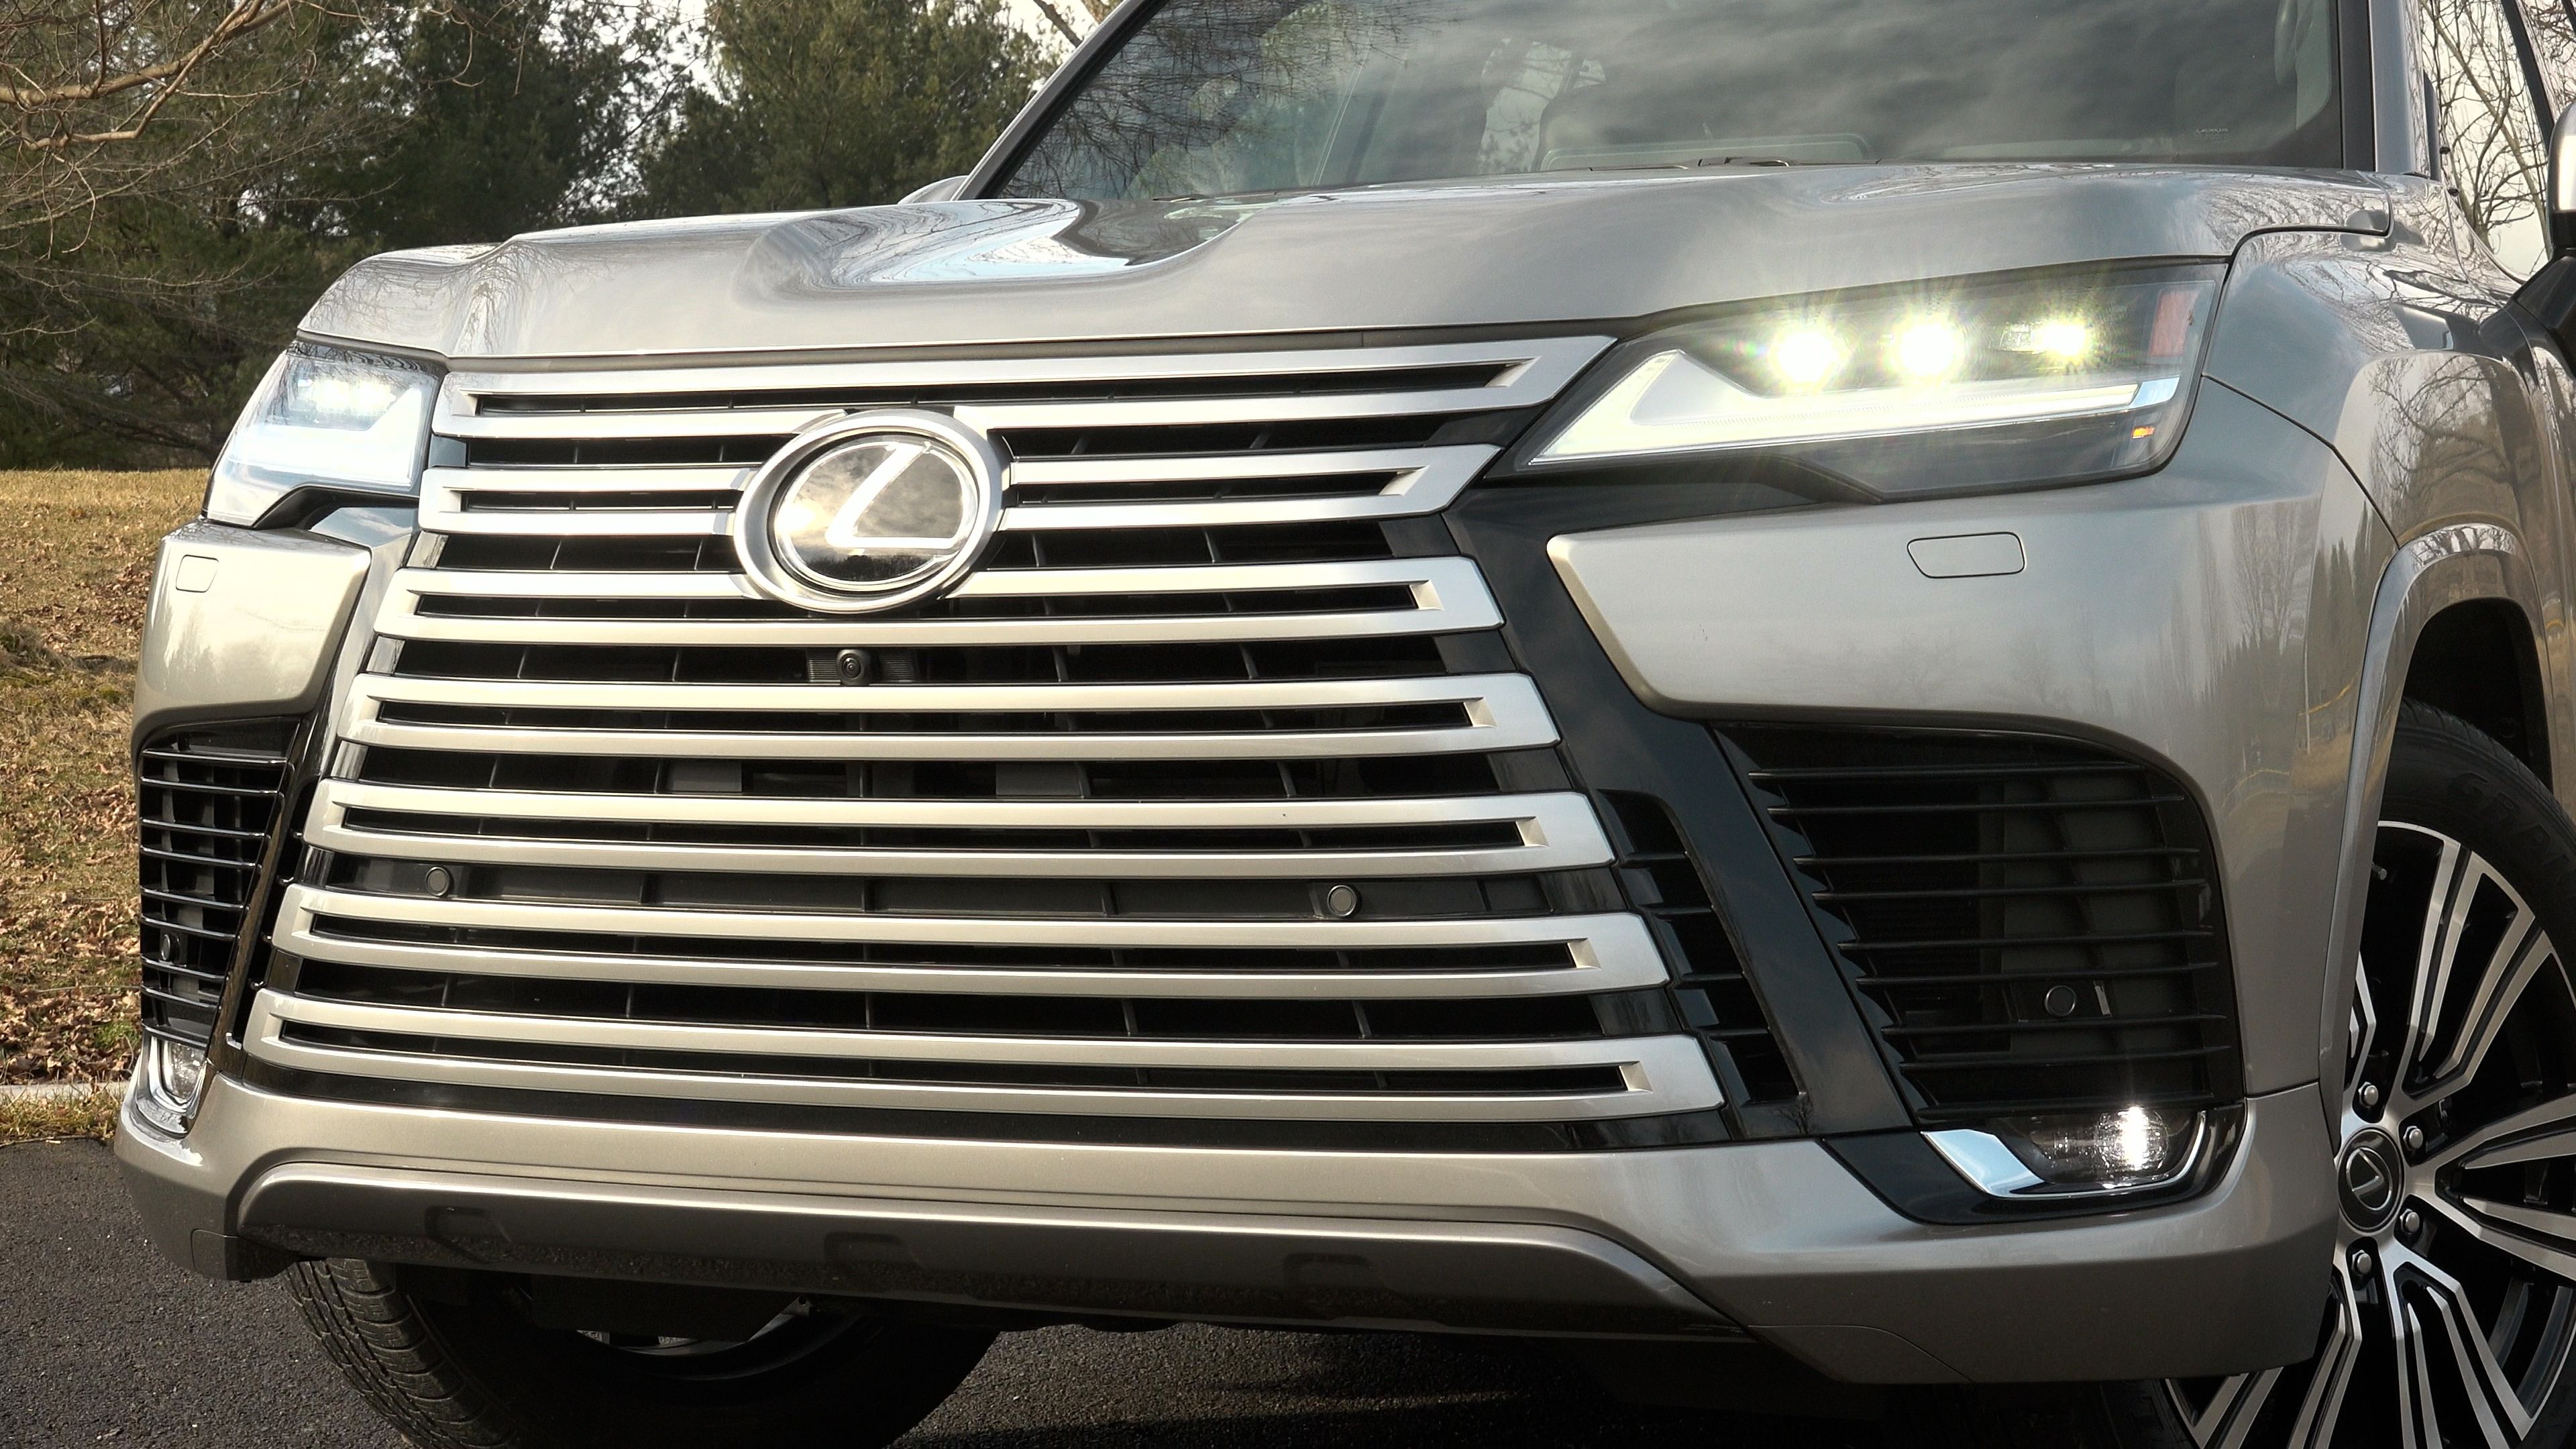 2022 Lexus LX 600 Review: All-New in an Old-School Way